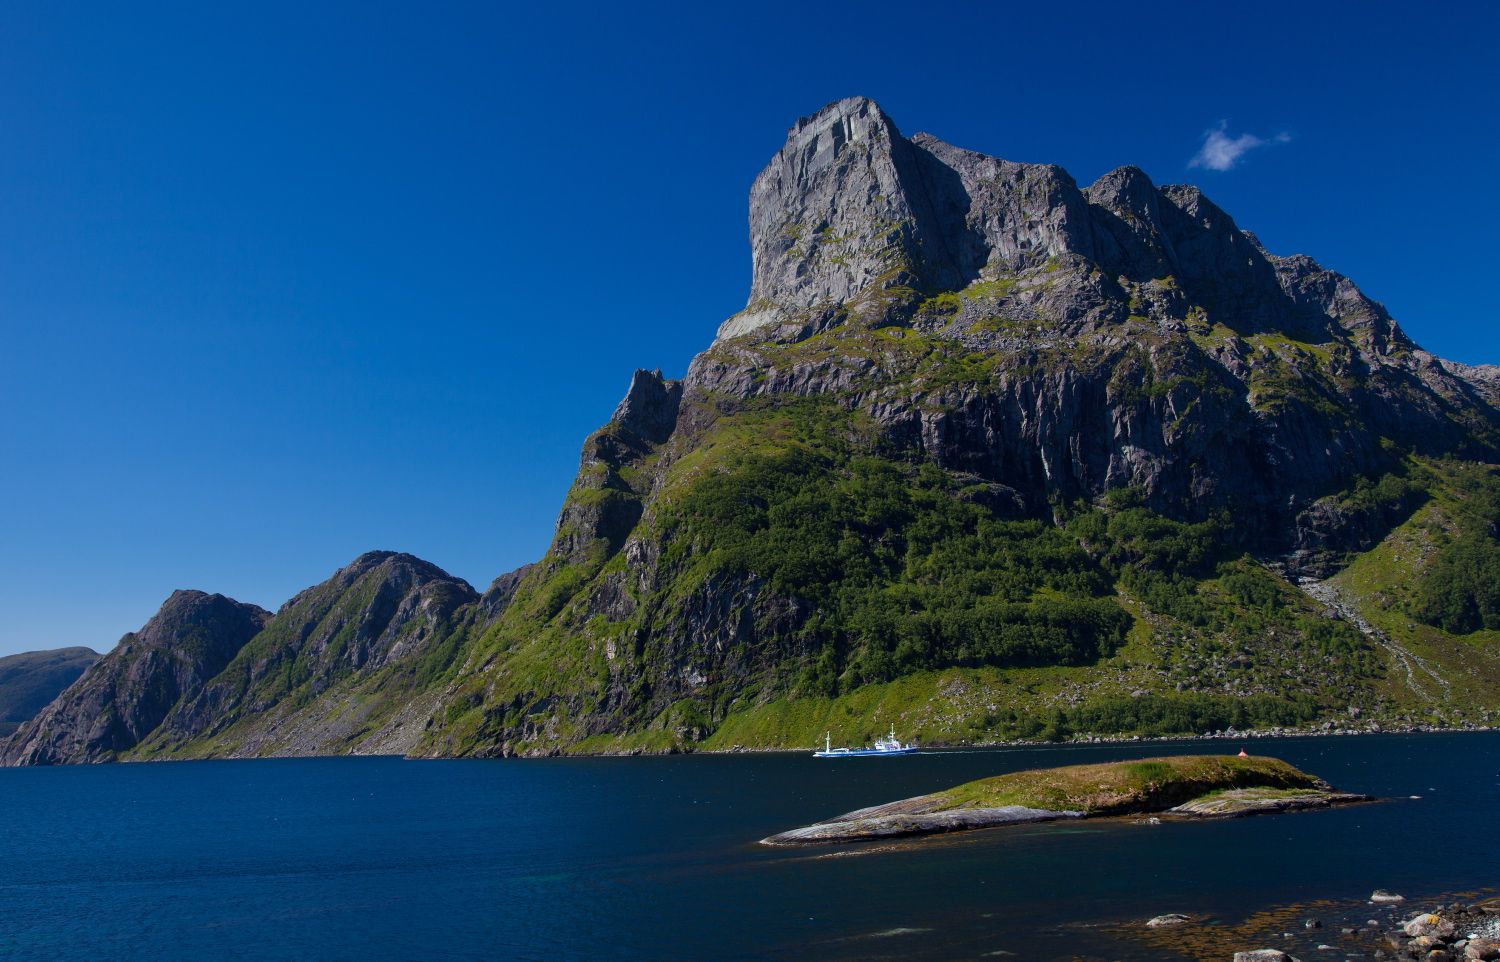 Mount Hornelen in Norway, sitting tall above the water.